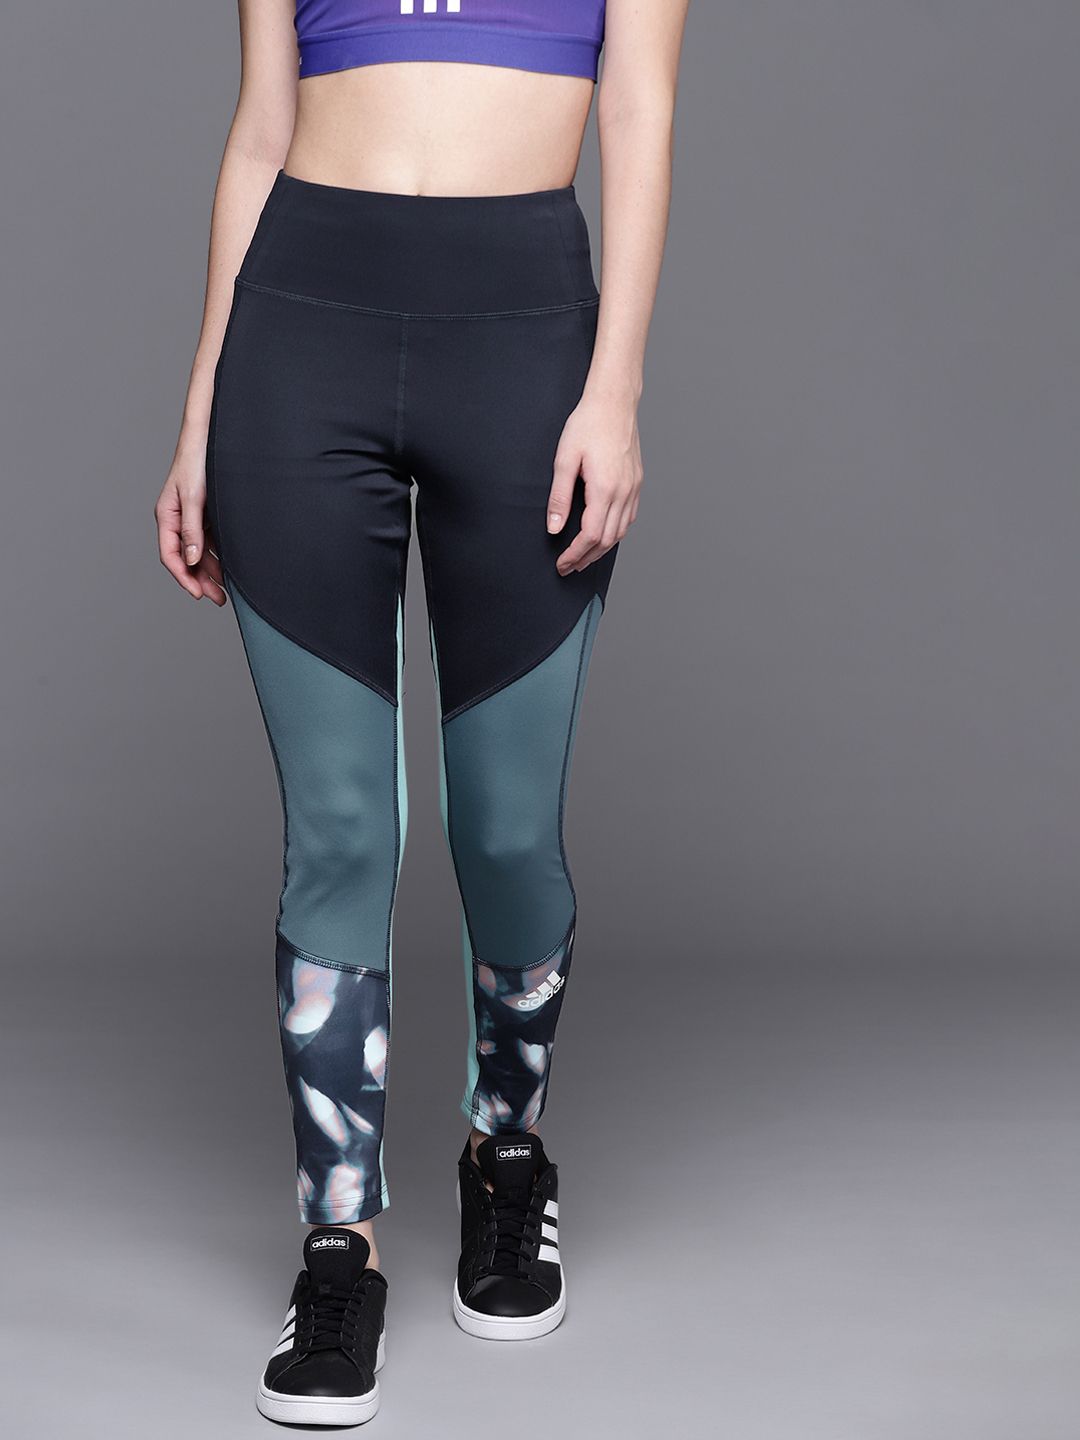 ADIDAS Women Navy Blue & Teal Blue Colourblocked Tights Price in India